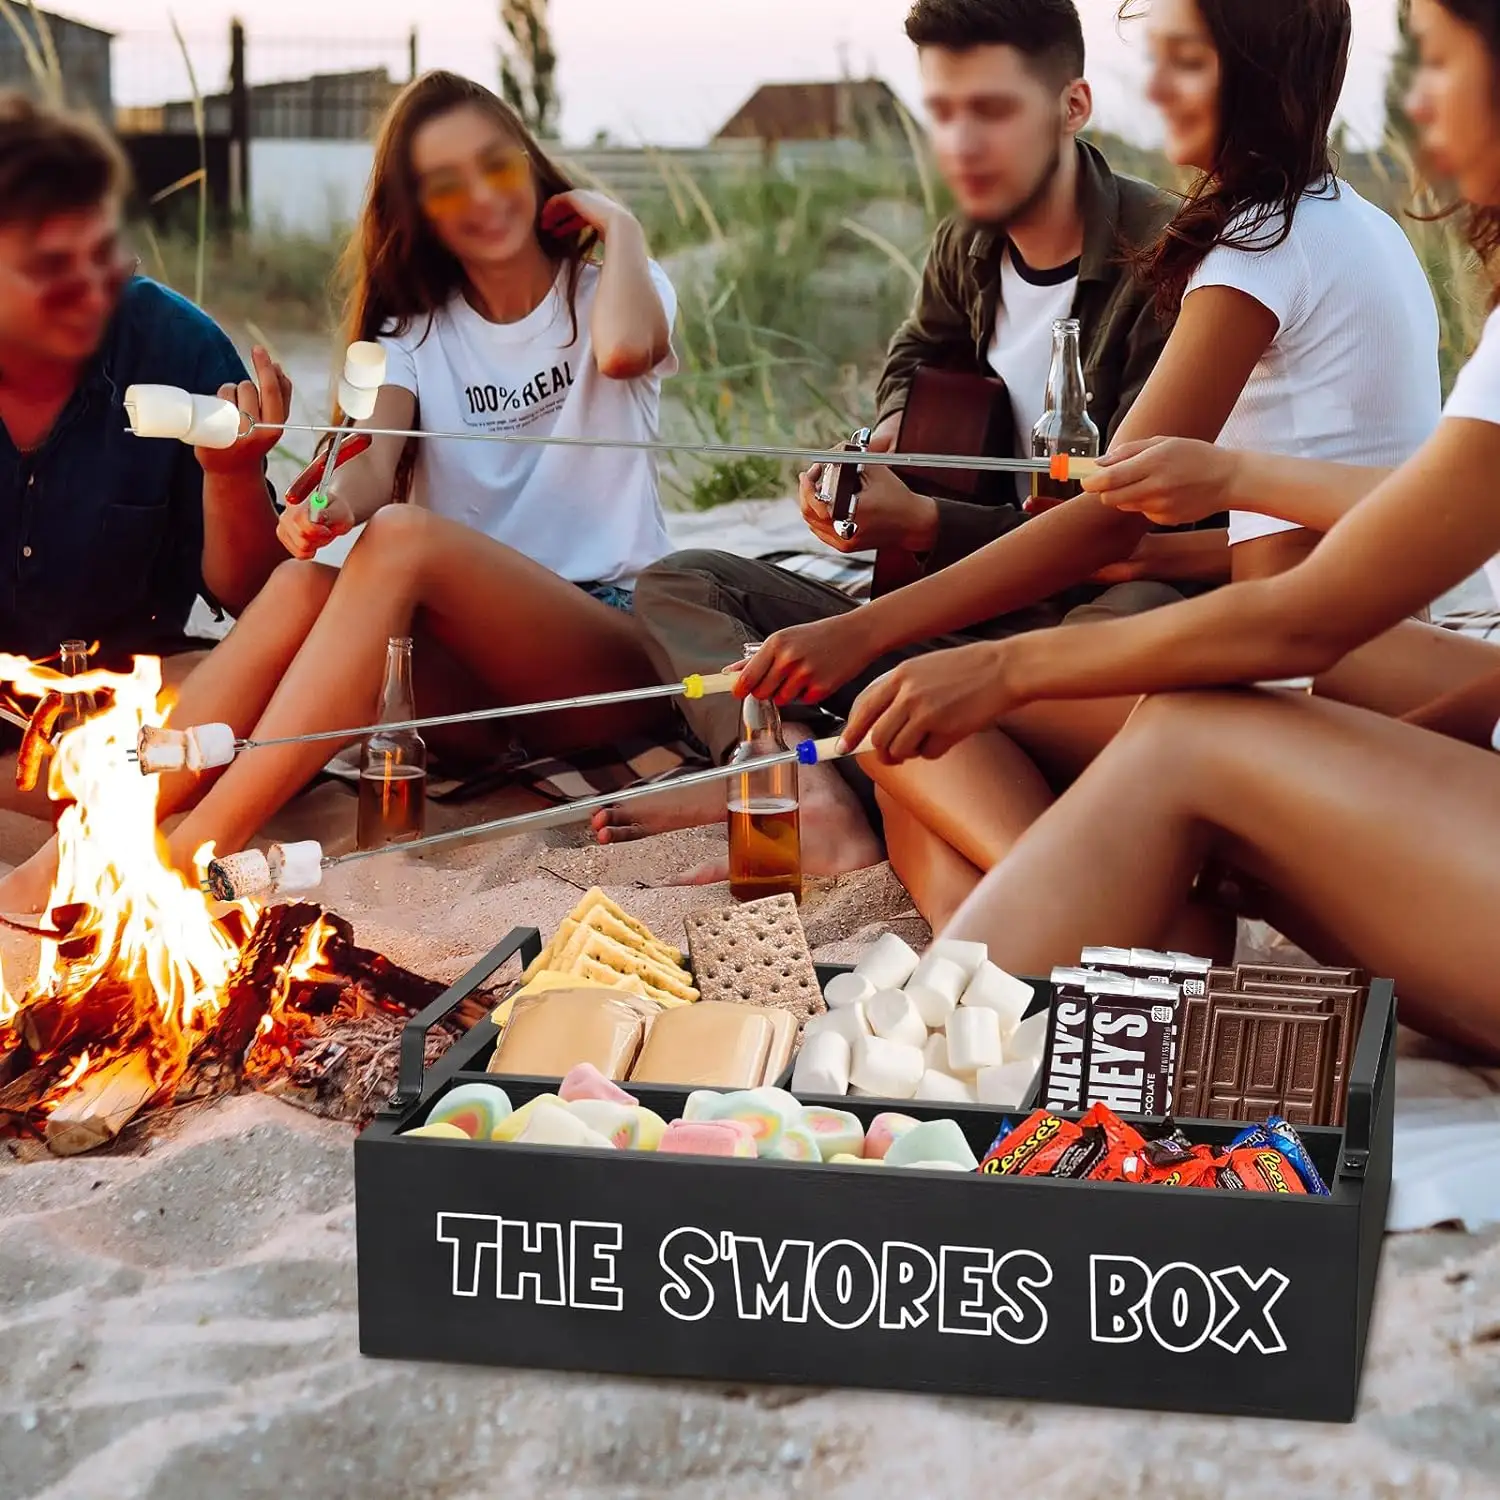 Bamboo smores stick set caddy for fire pit and smores roasting station bar holder wooden box